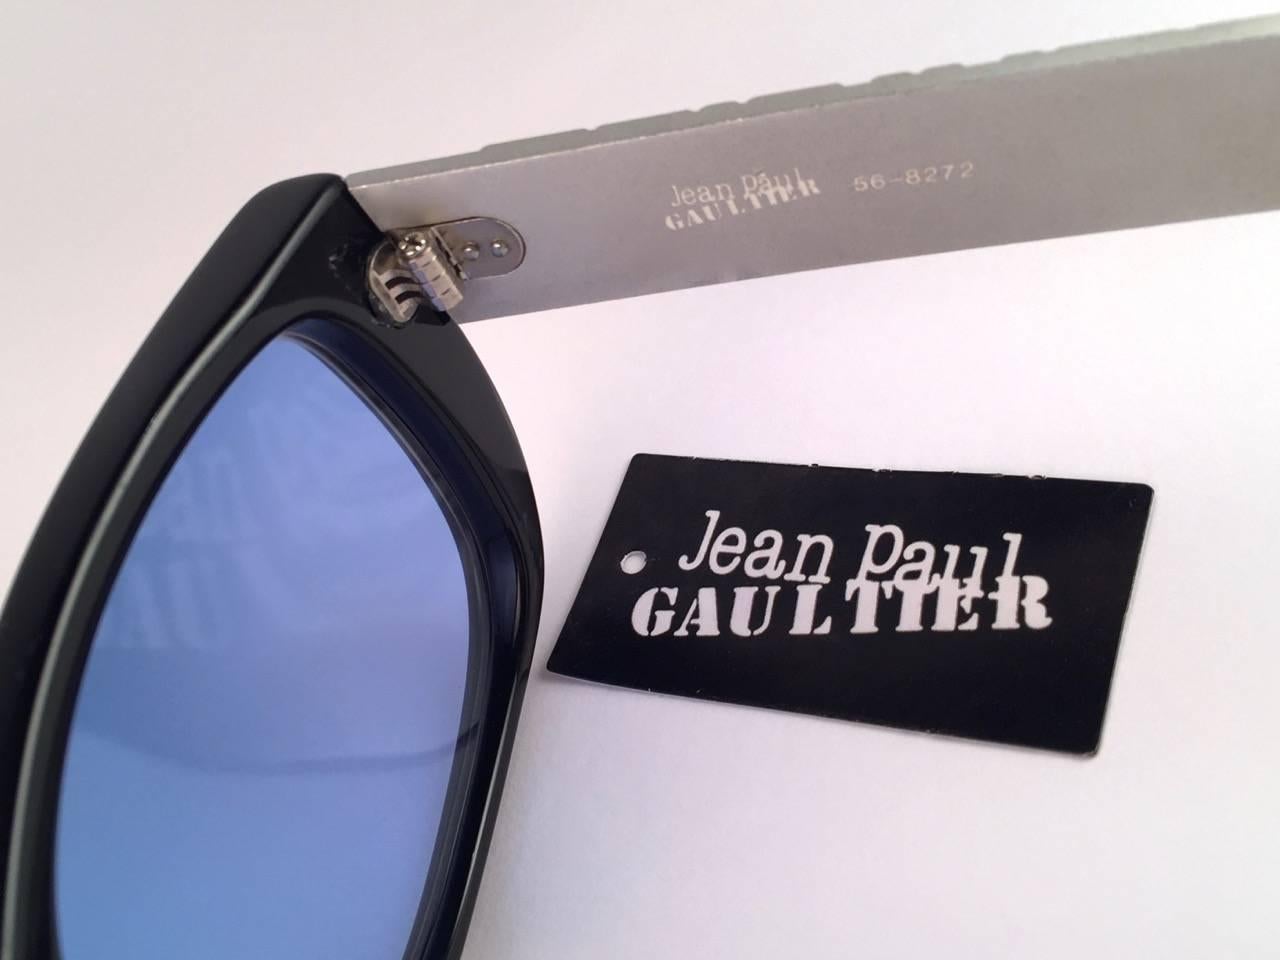 Mint Jean Paul Gaultier 56 8272 Tortoise Iconic Collectors Item 1990's Japan  In Excellent Condition In Baleares, Baleares